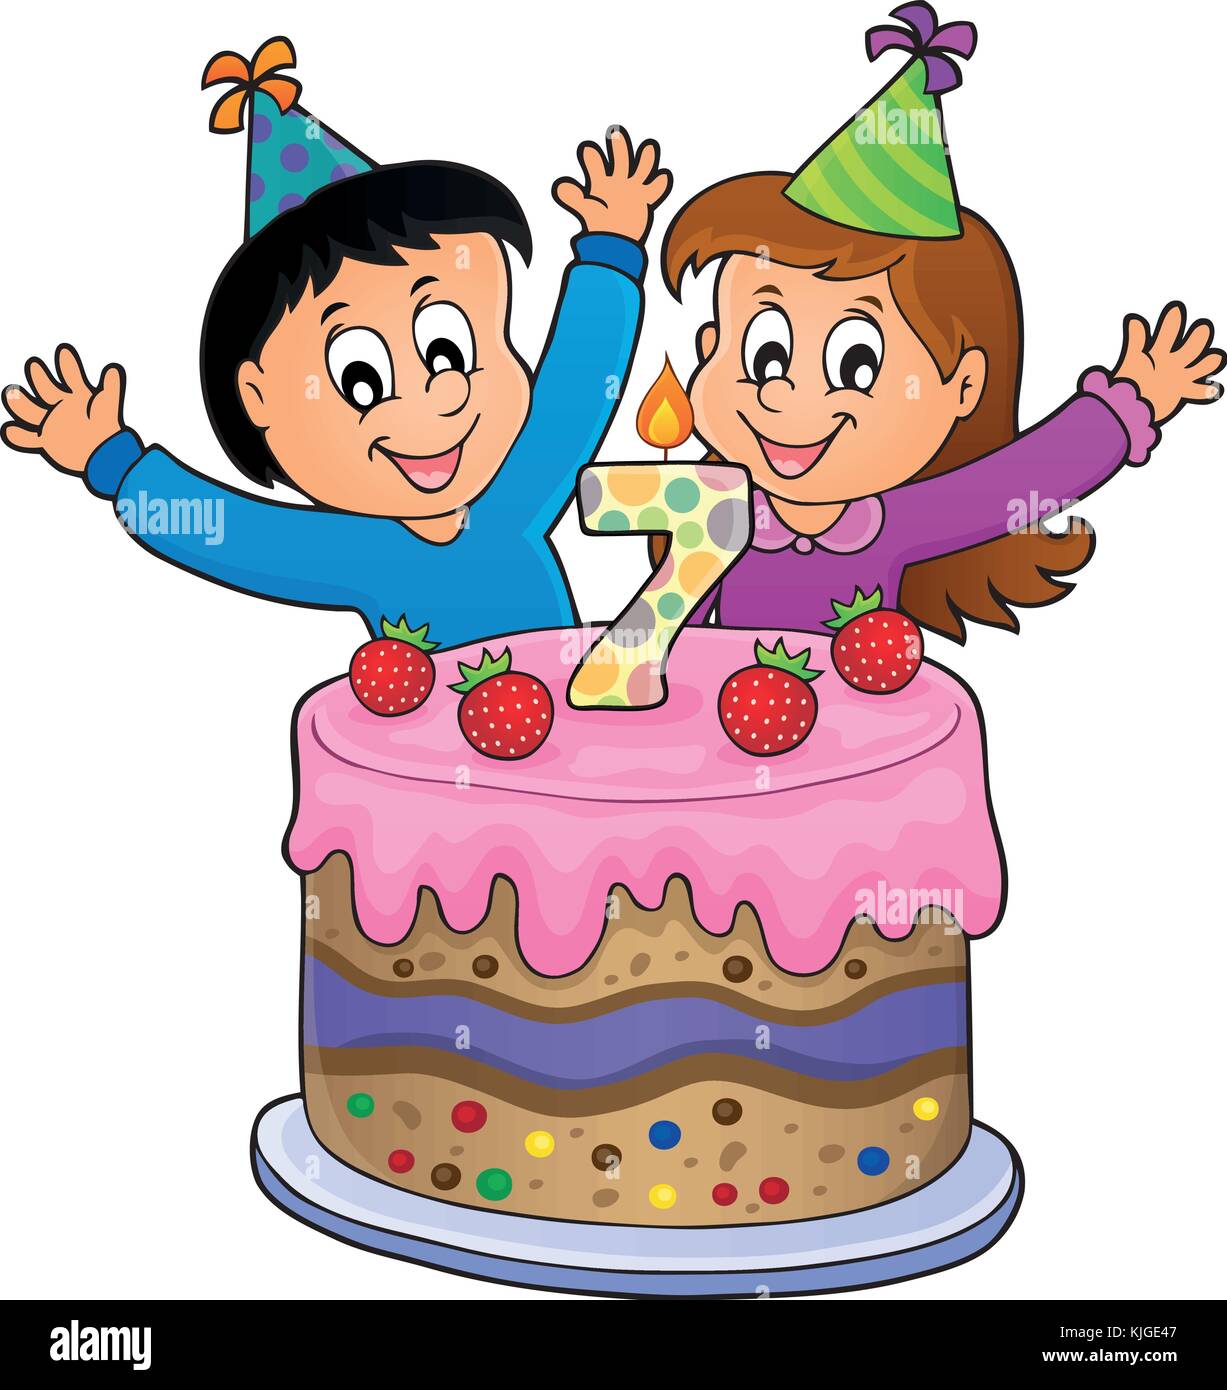 Download Happy birthday image for 7 years old - eps10 vector ...